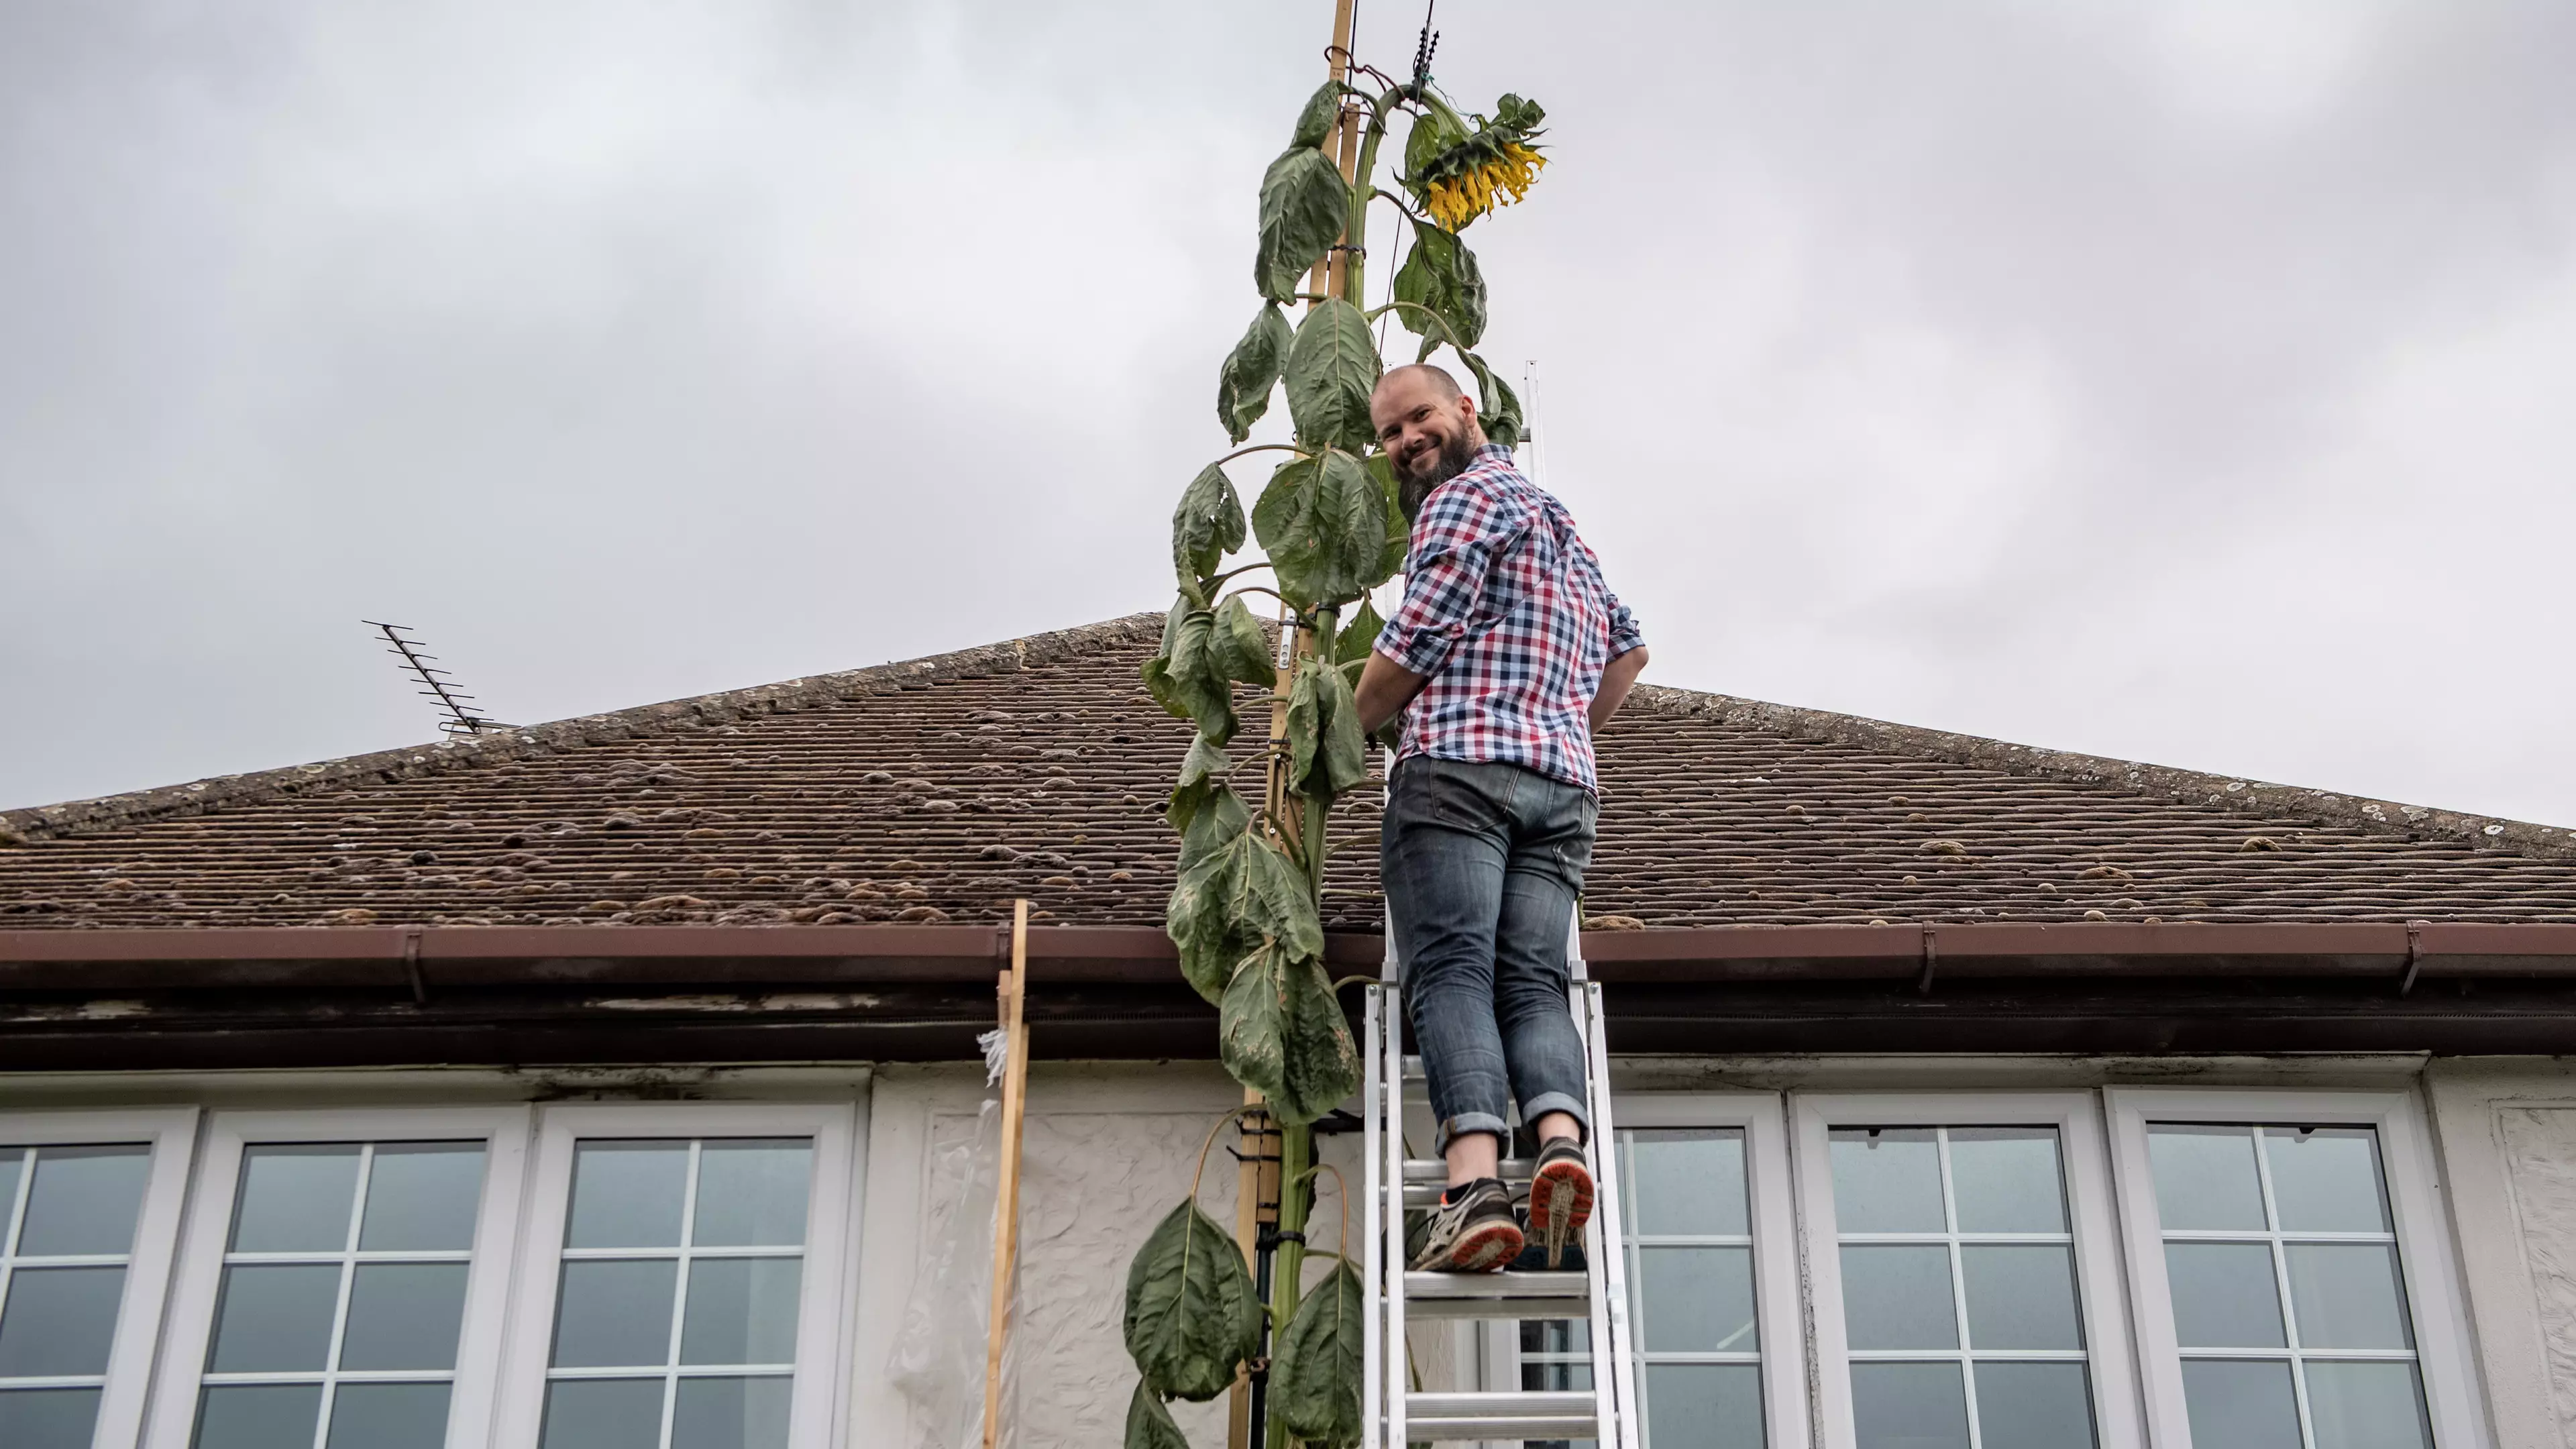 Dad Grows 20ft Sunflower After Son Asks For One As Tall As The House